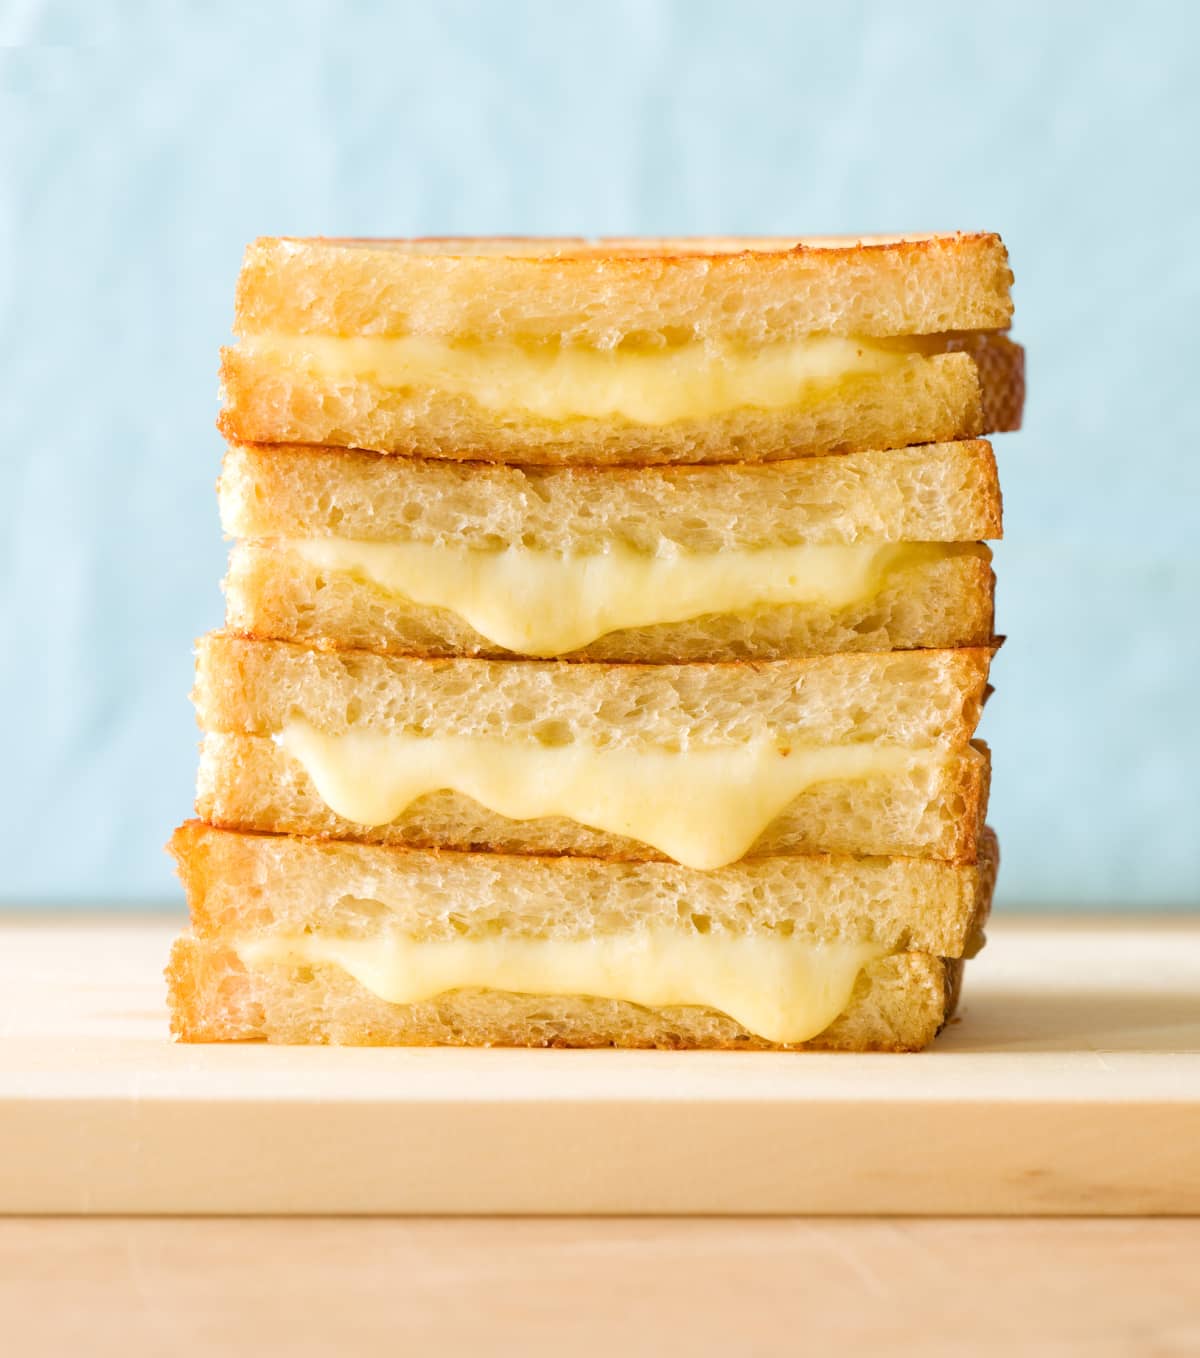 grilled cheese sandwich on gray concrete background